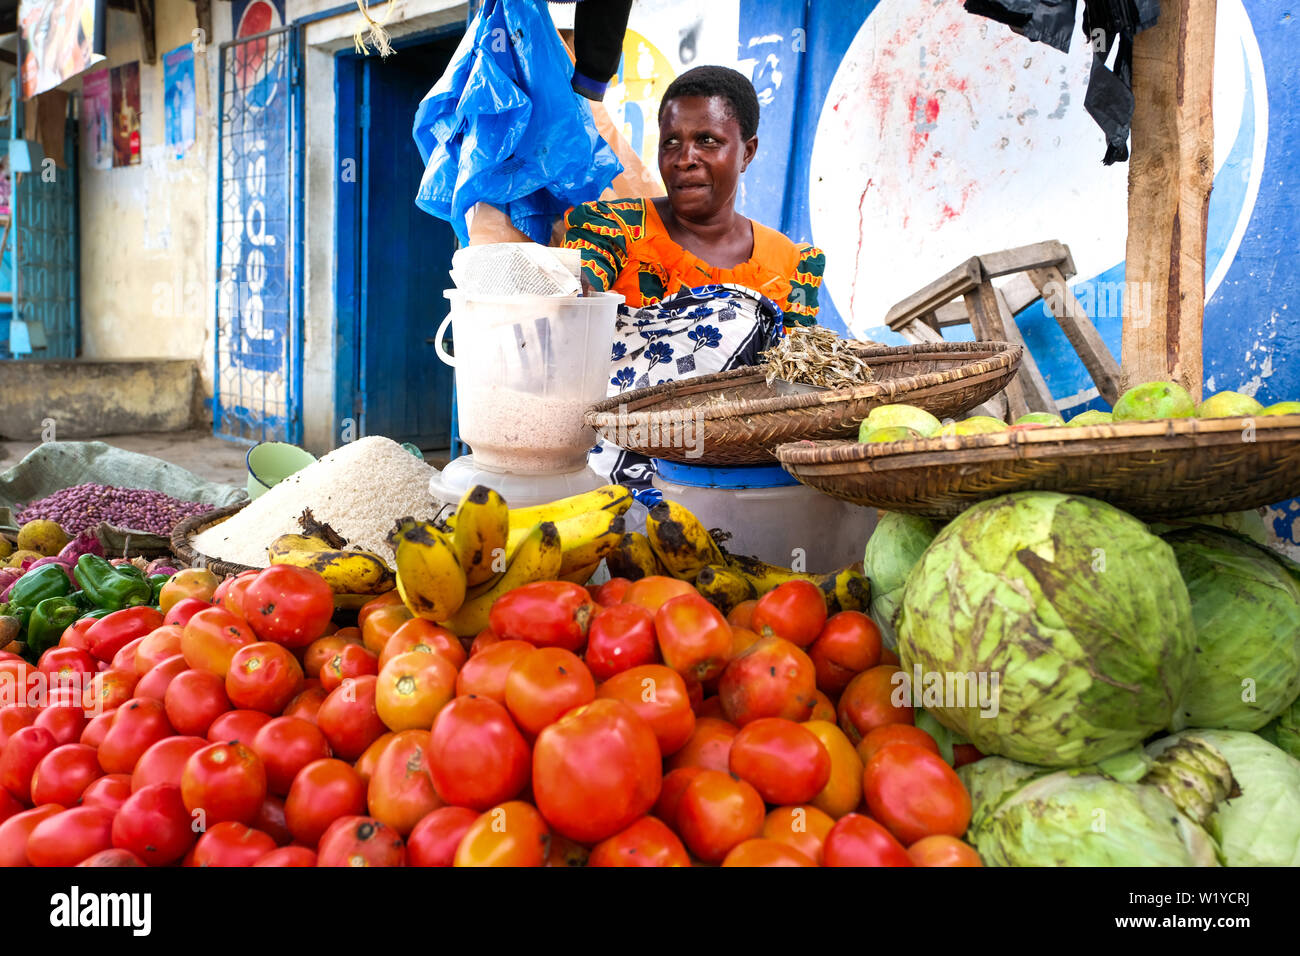 Fruit and vegetable stall in Mbeya, Tanzania., Africa   ---   Obst- und Gemüsestand in Mbeya, Tansania. Stock Photo